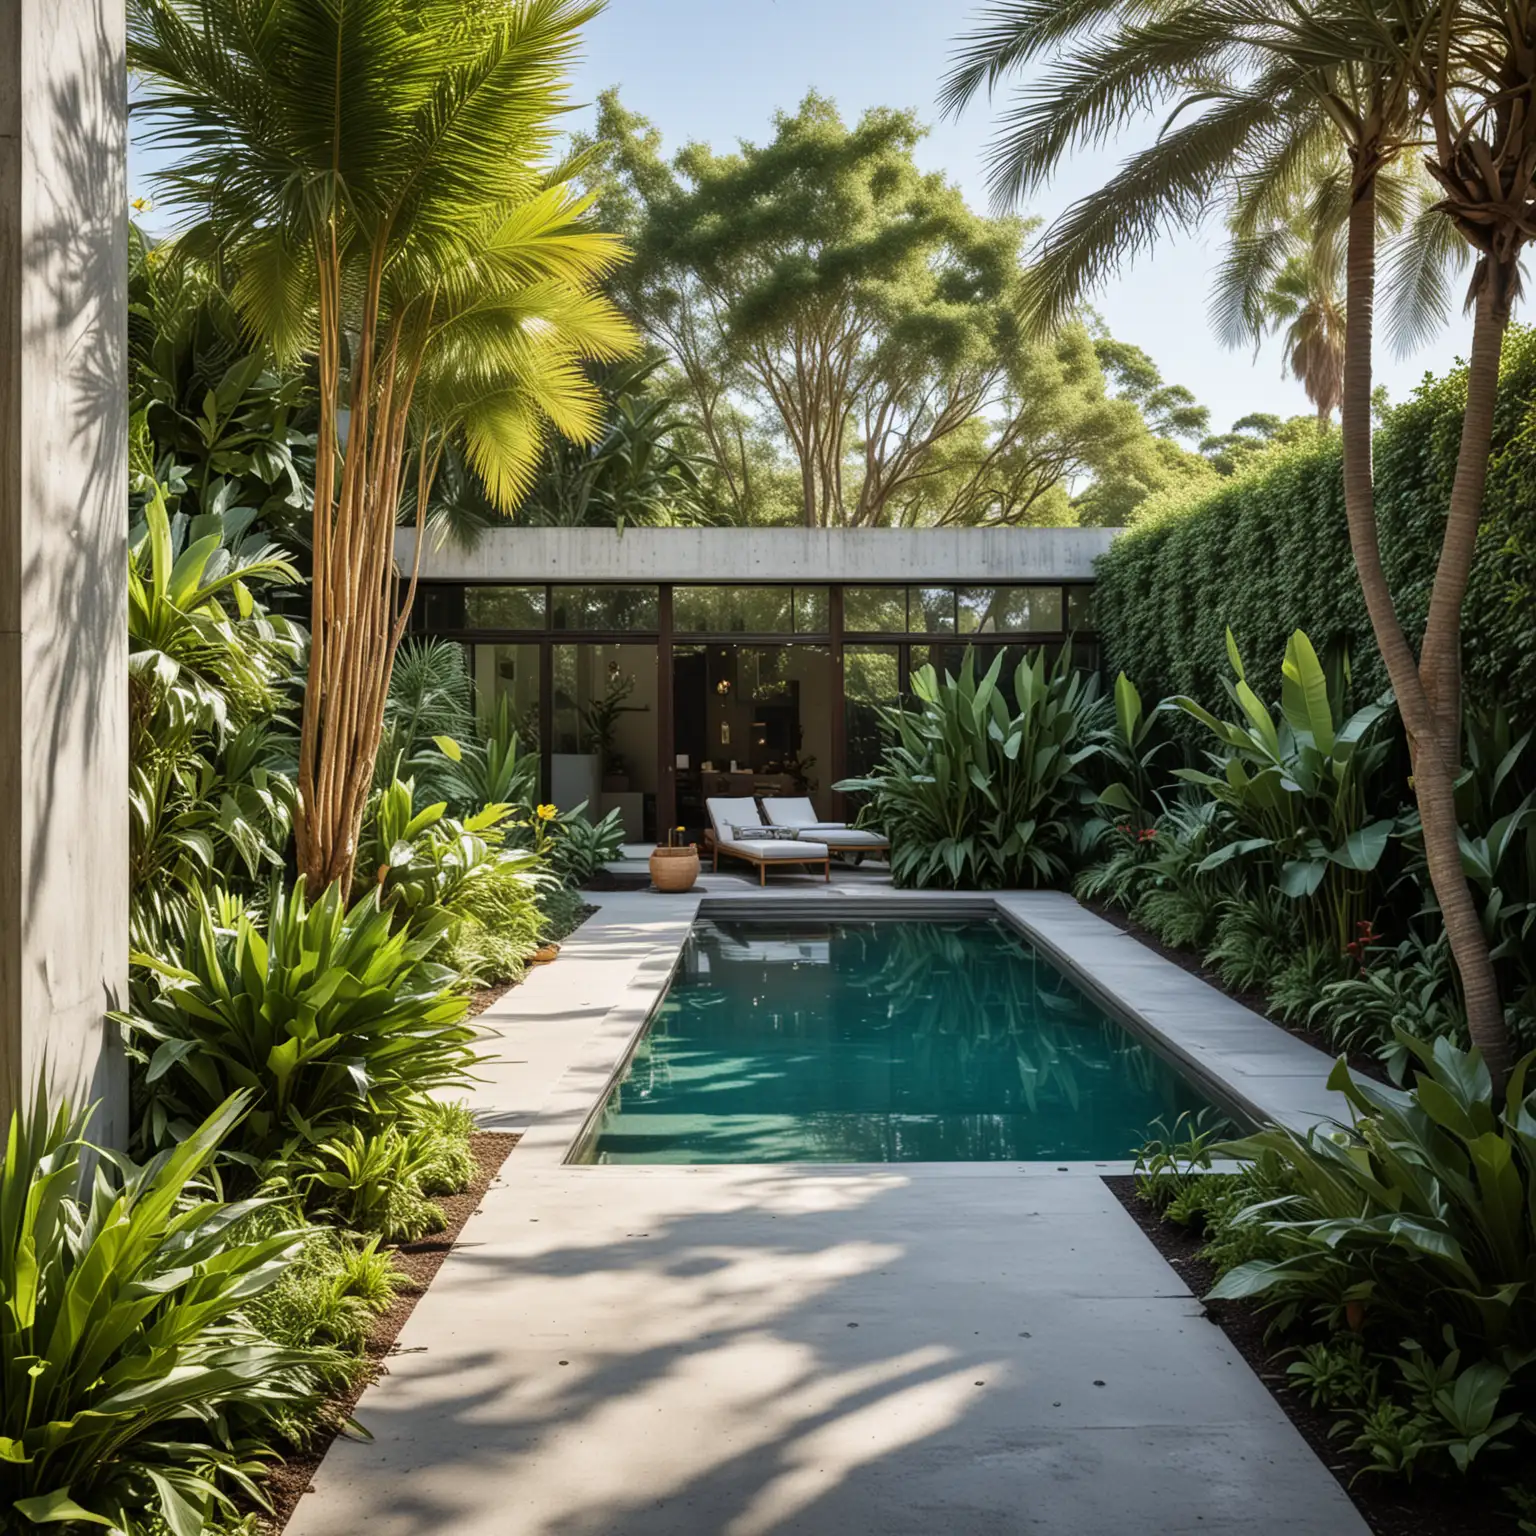 a long shot of modern outdoor garden with a symmetrical layout centered around a large rectangular reflecting pool. Incorporate tall palm trees and bird-of-paradise plants for a tropical touch. Use smooth concrete for the pathways and integrate a minimalist wooden gate at the entrance. The garden includes a container house with a rooftop terrace, providing an elevated view of the lush greenery. Set this scene on a warm, sunny afternoon, with vibrant green foliage and the pool reflecting the clear blue sky, enhanced by strategically placed solar-powered lights.